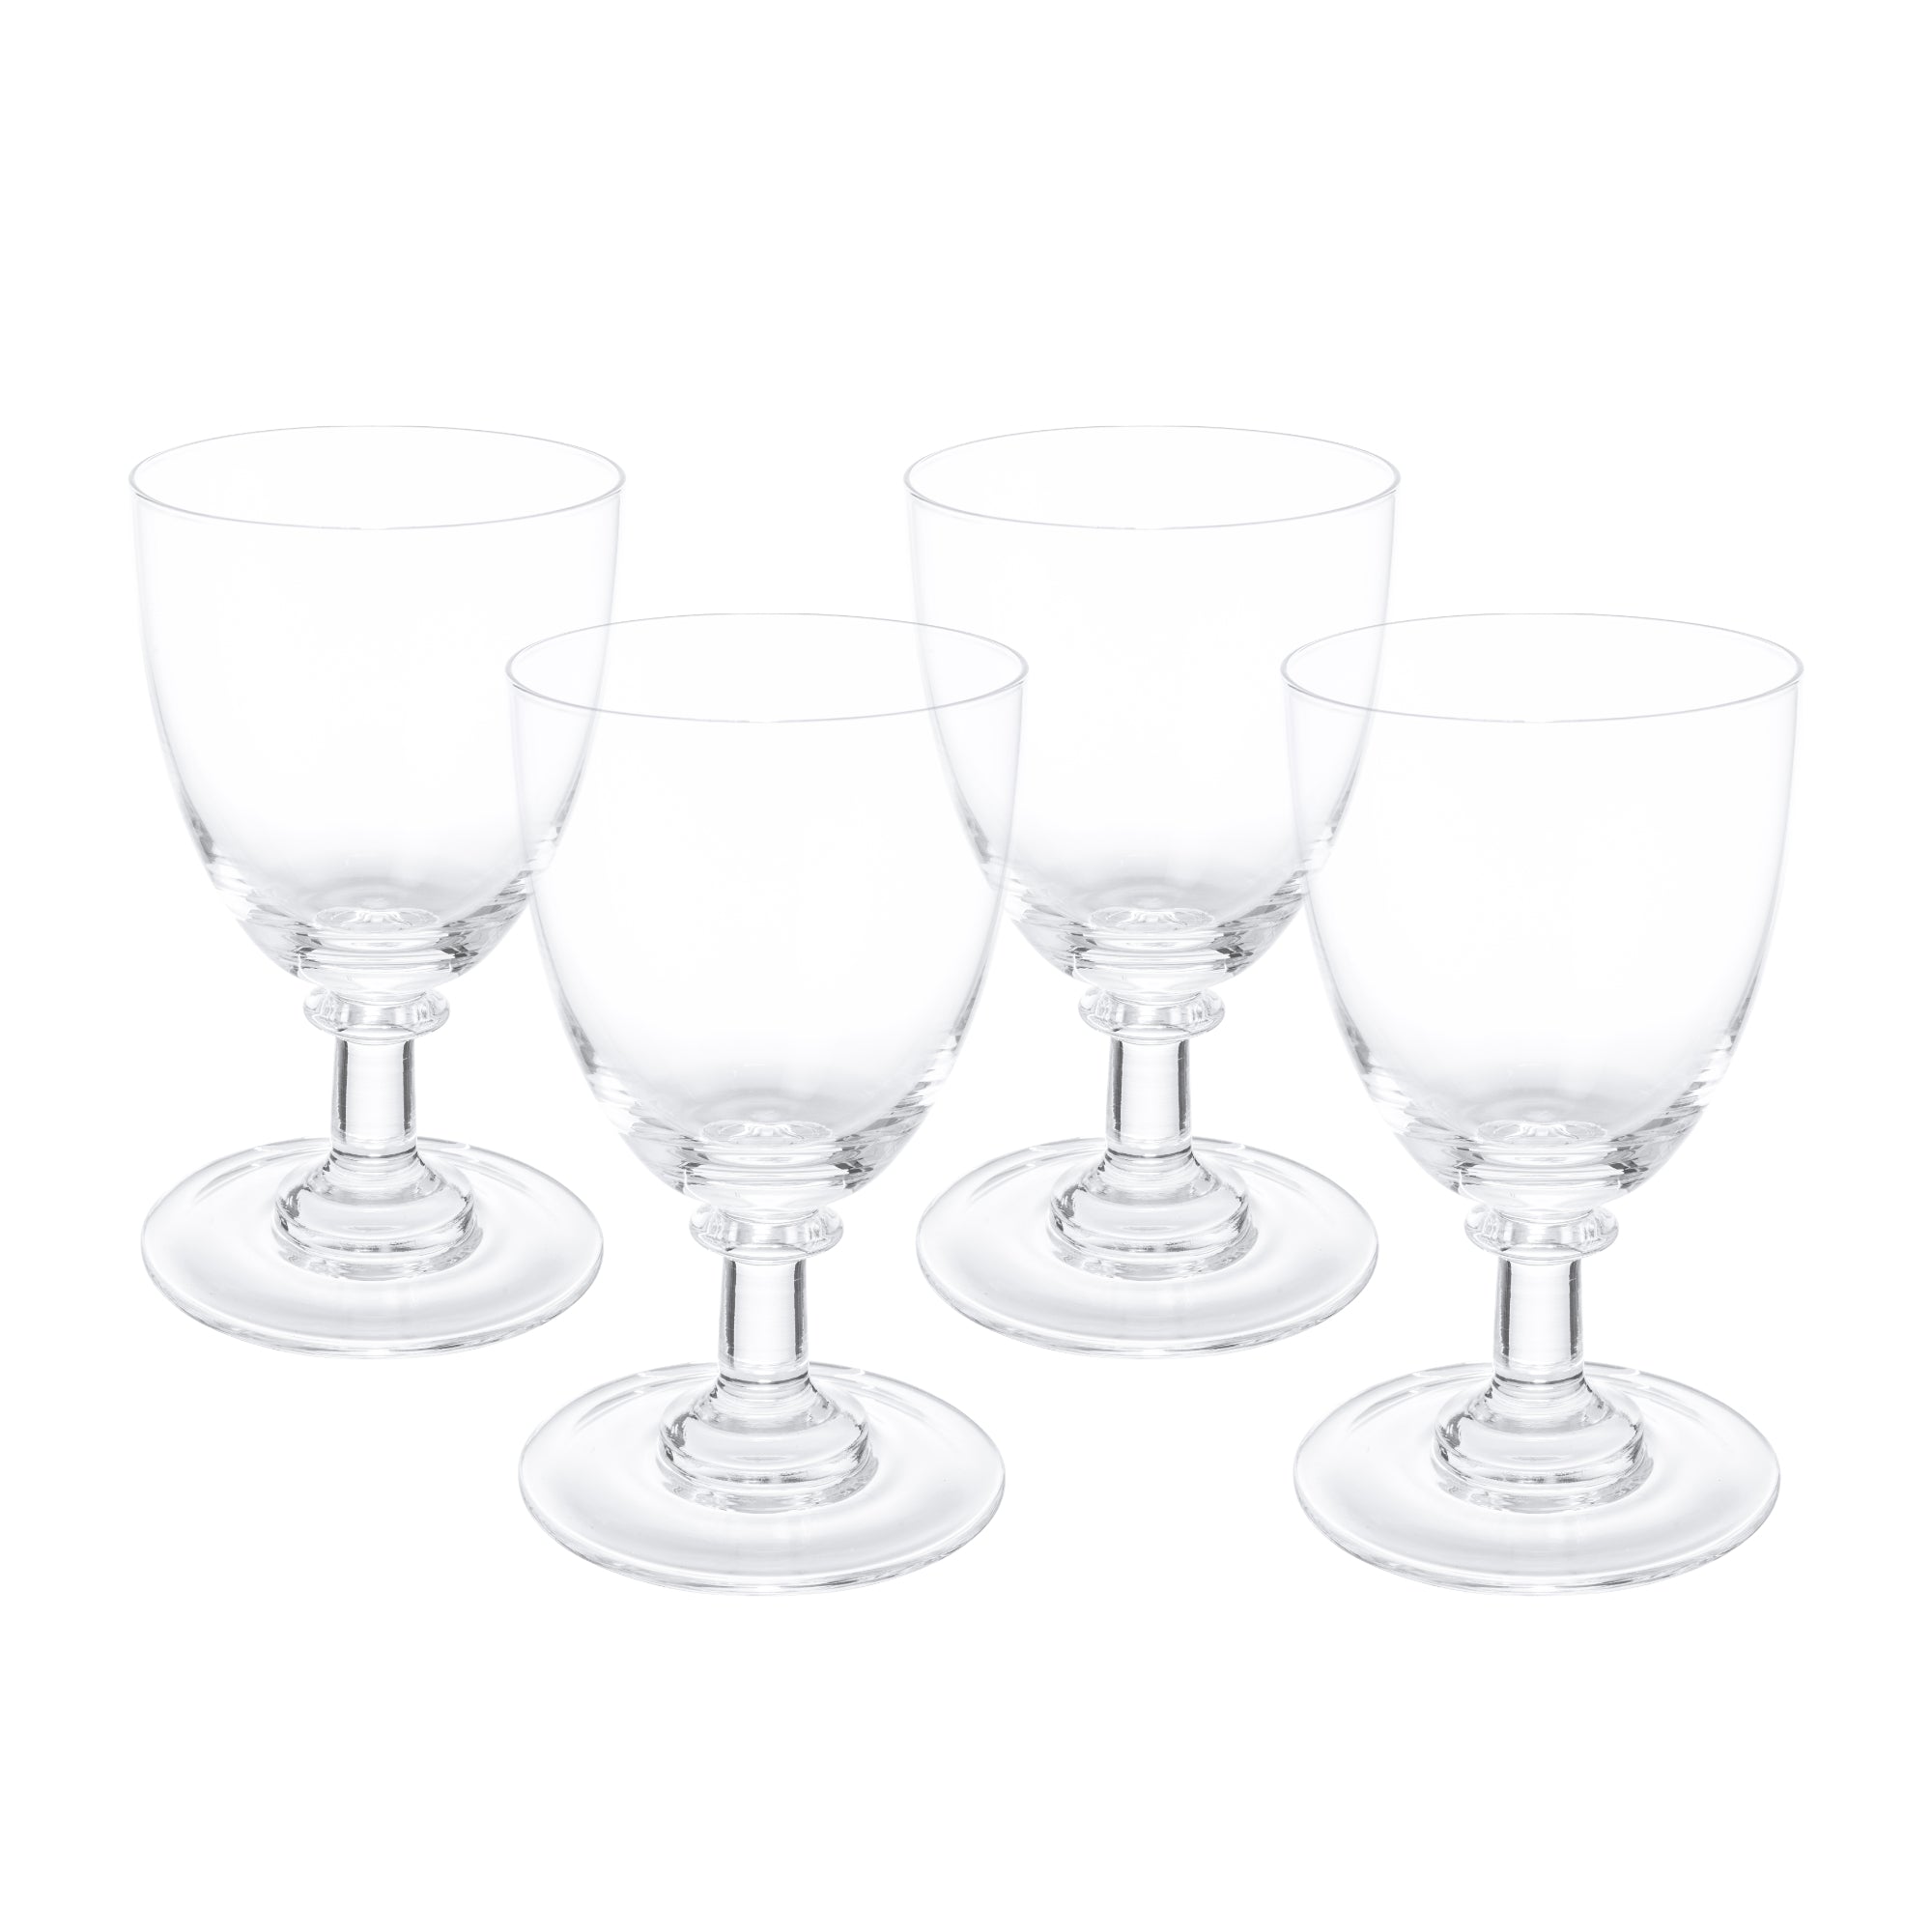 MARY BERRY SIGNATURE PACK OF FOUR RED WINE GLASS